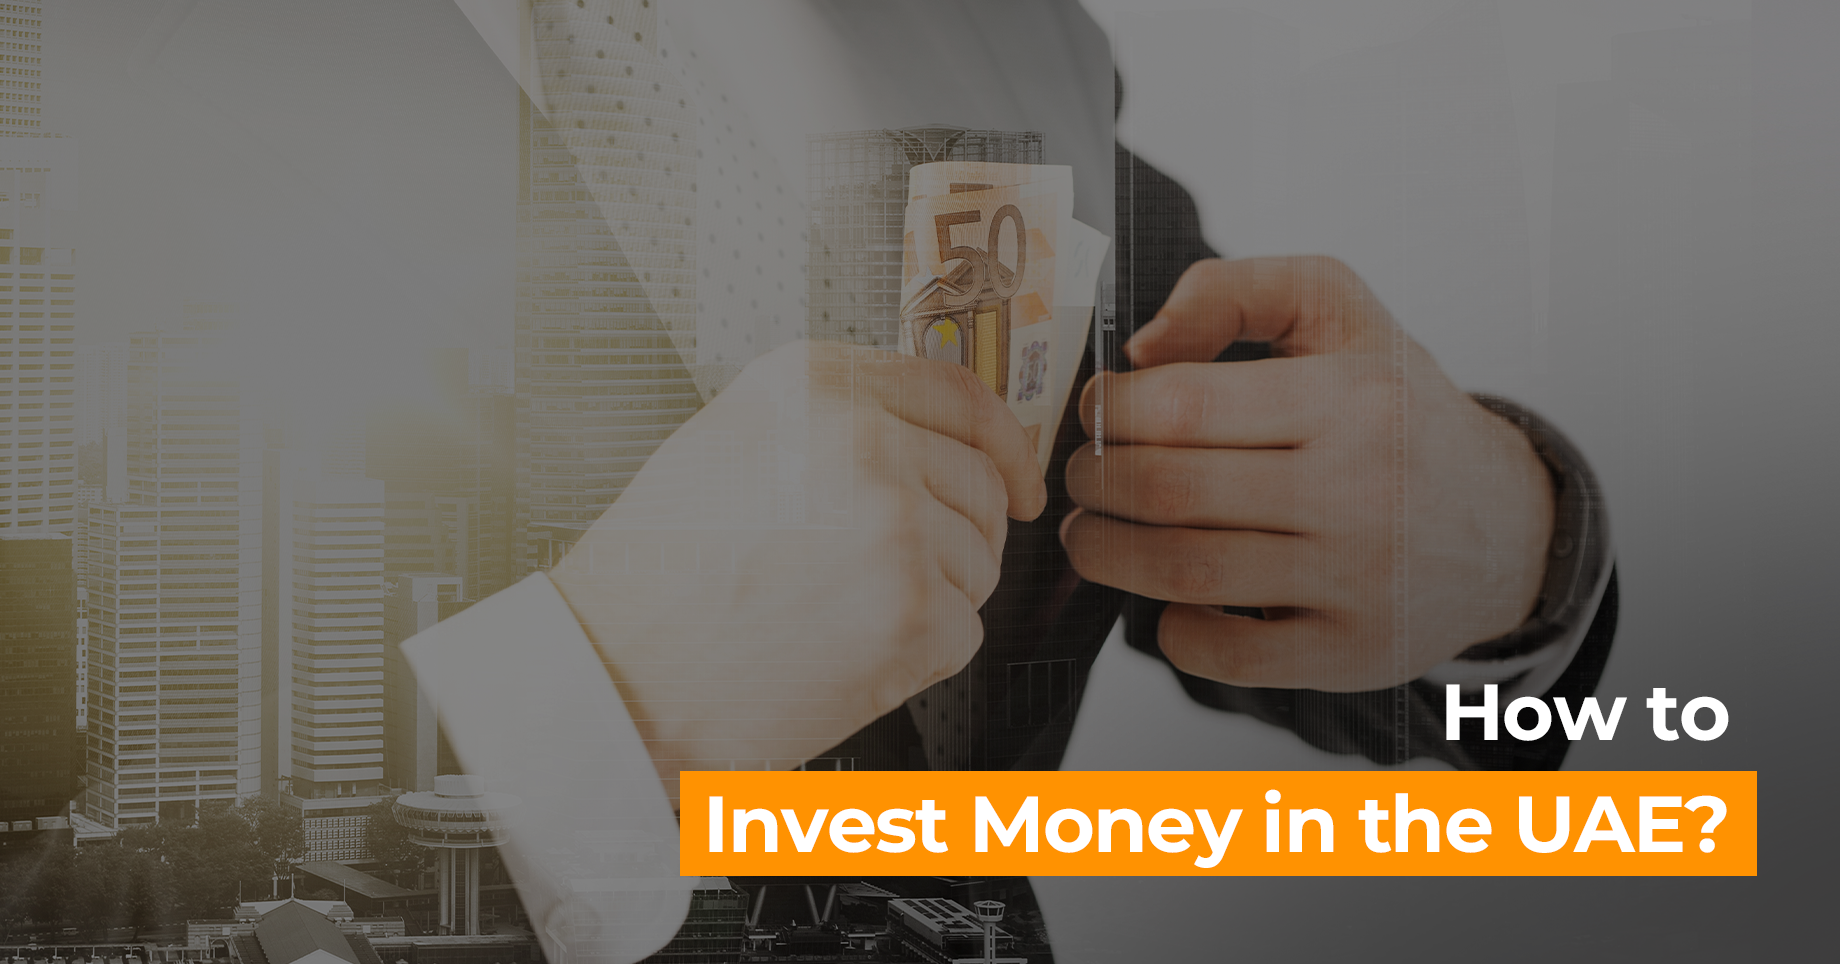 How to Invest Money in the UAE?